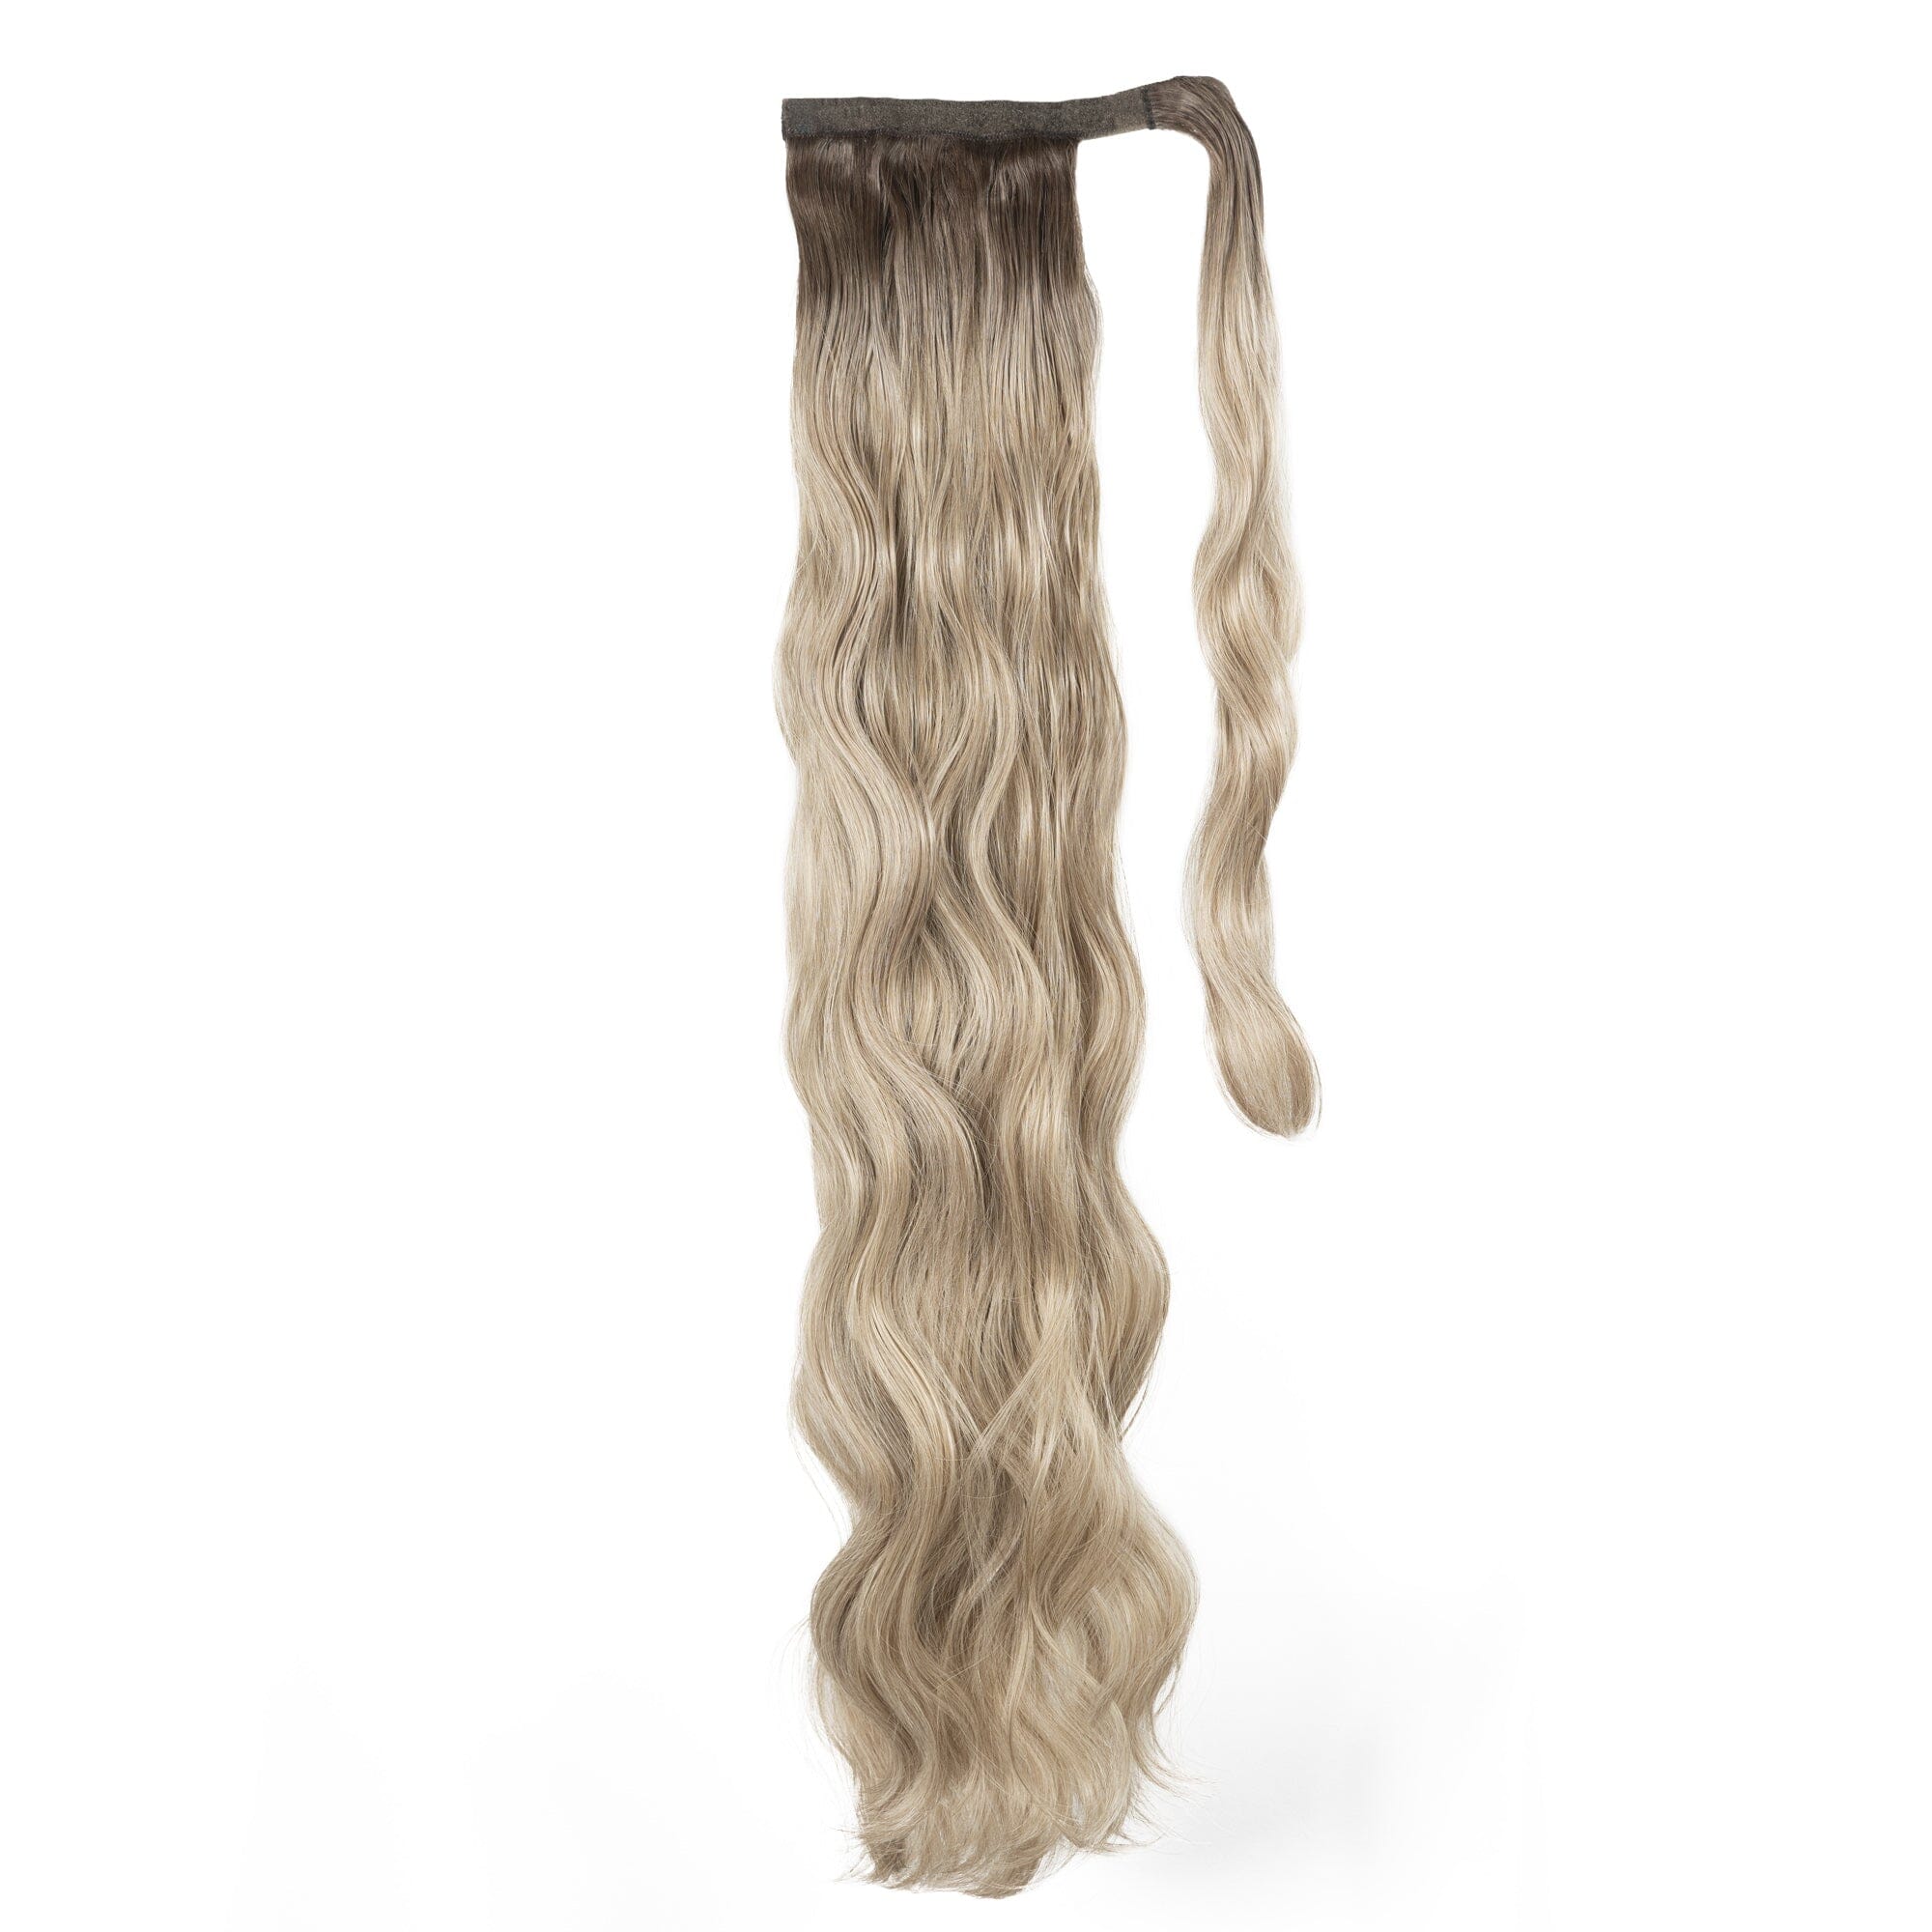 30" Body Wave Clip In Ponytail (7447136338115)#color_cool-blonde